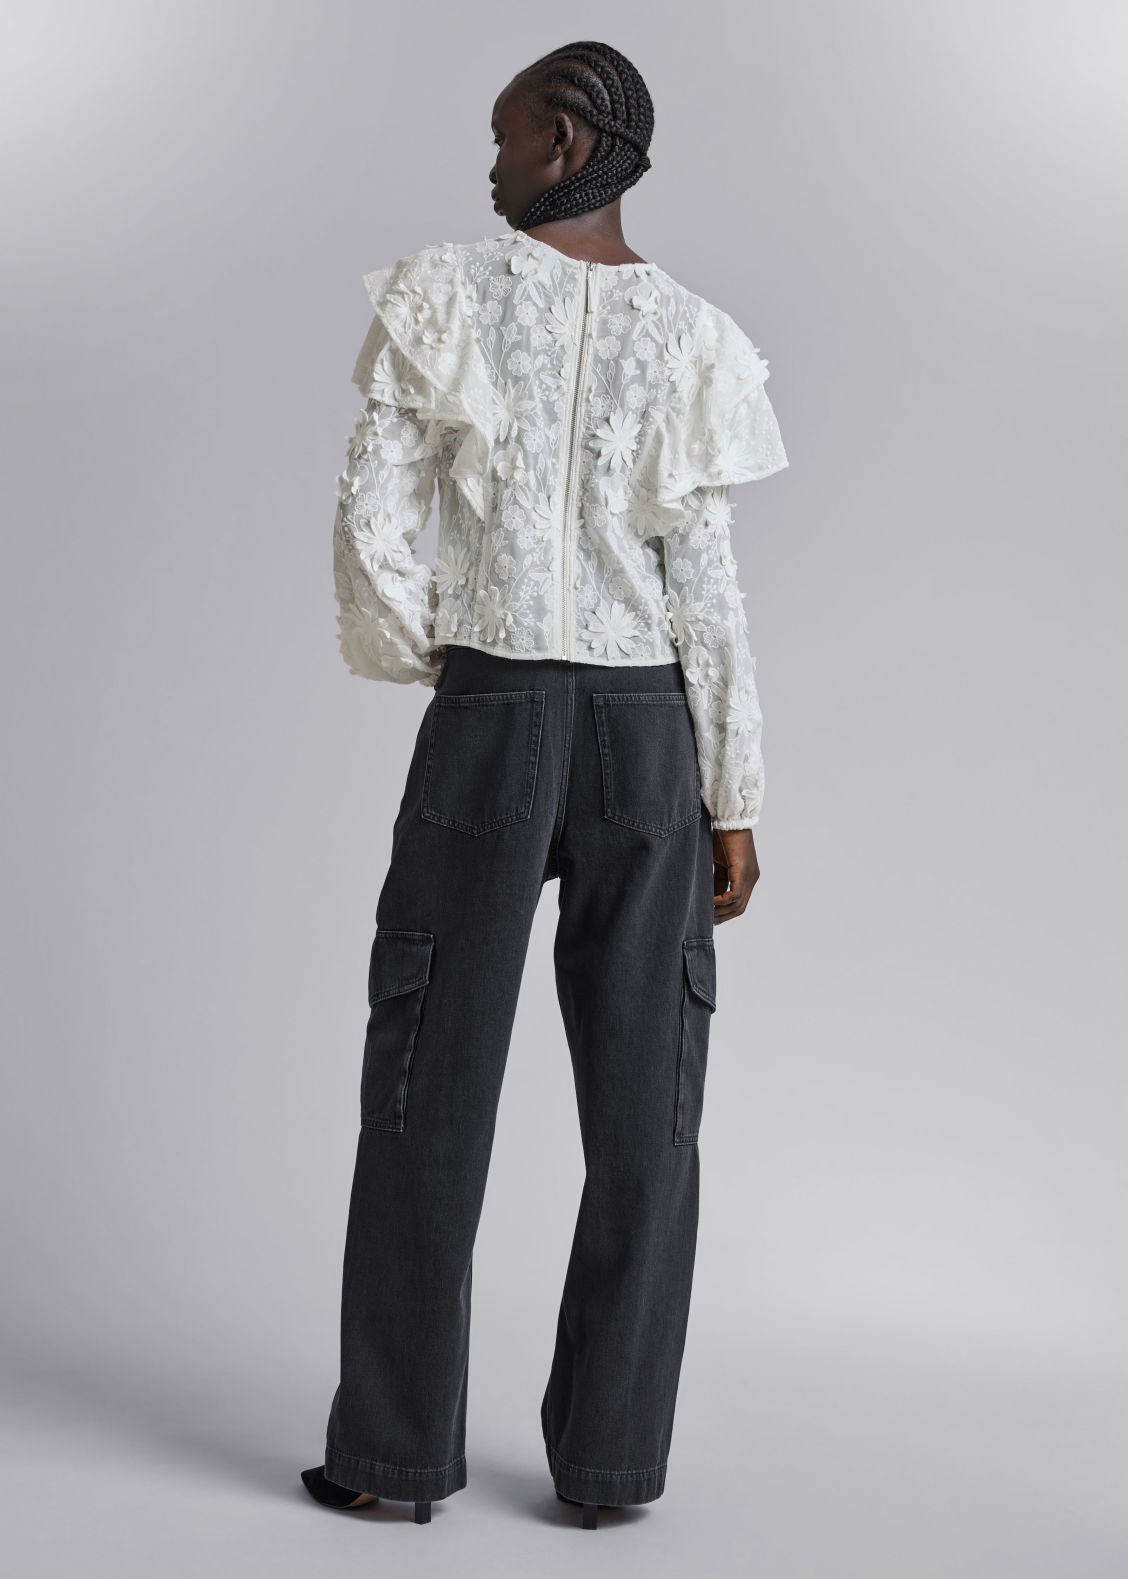 Embroidered ruffle blouse